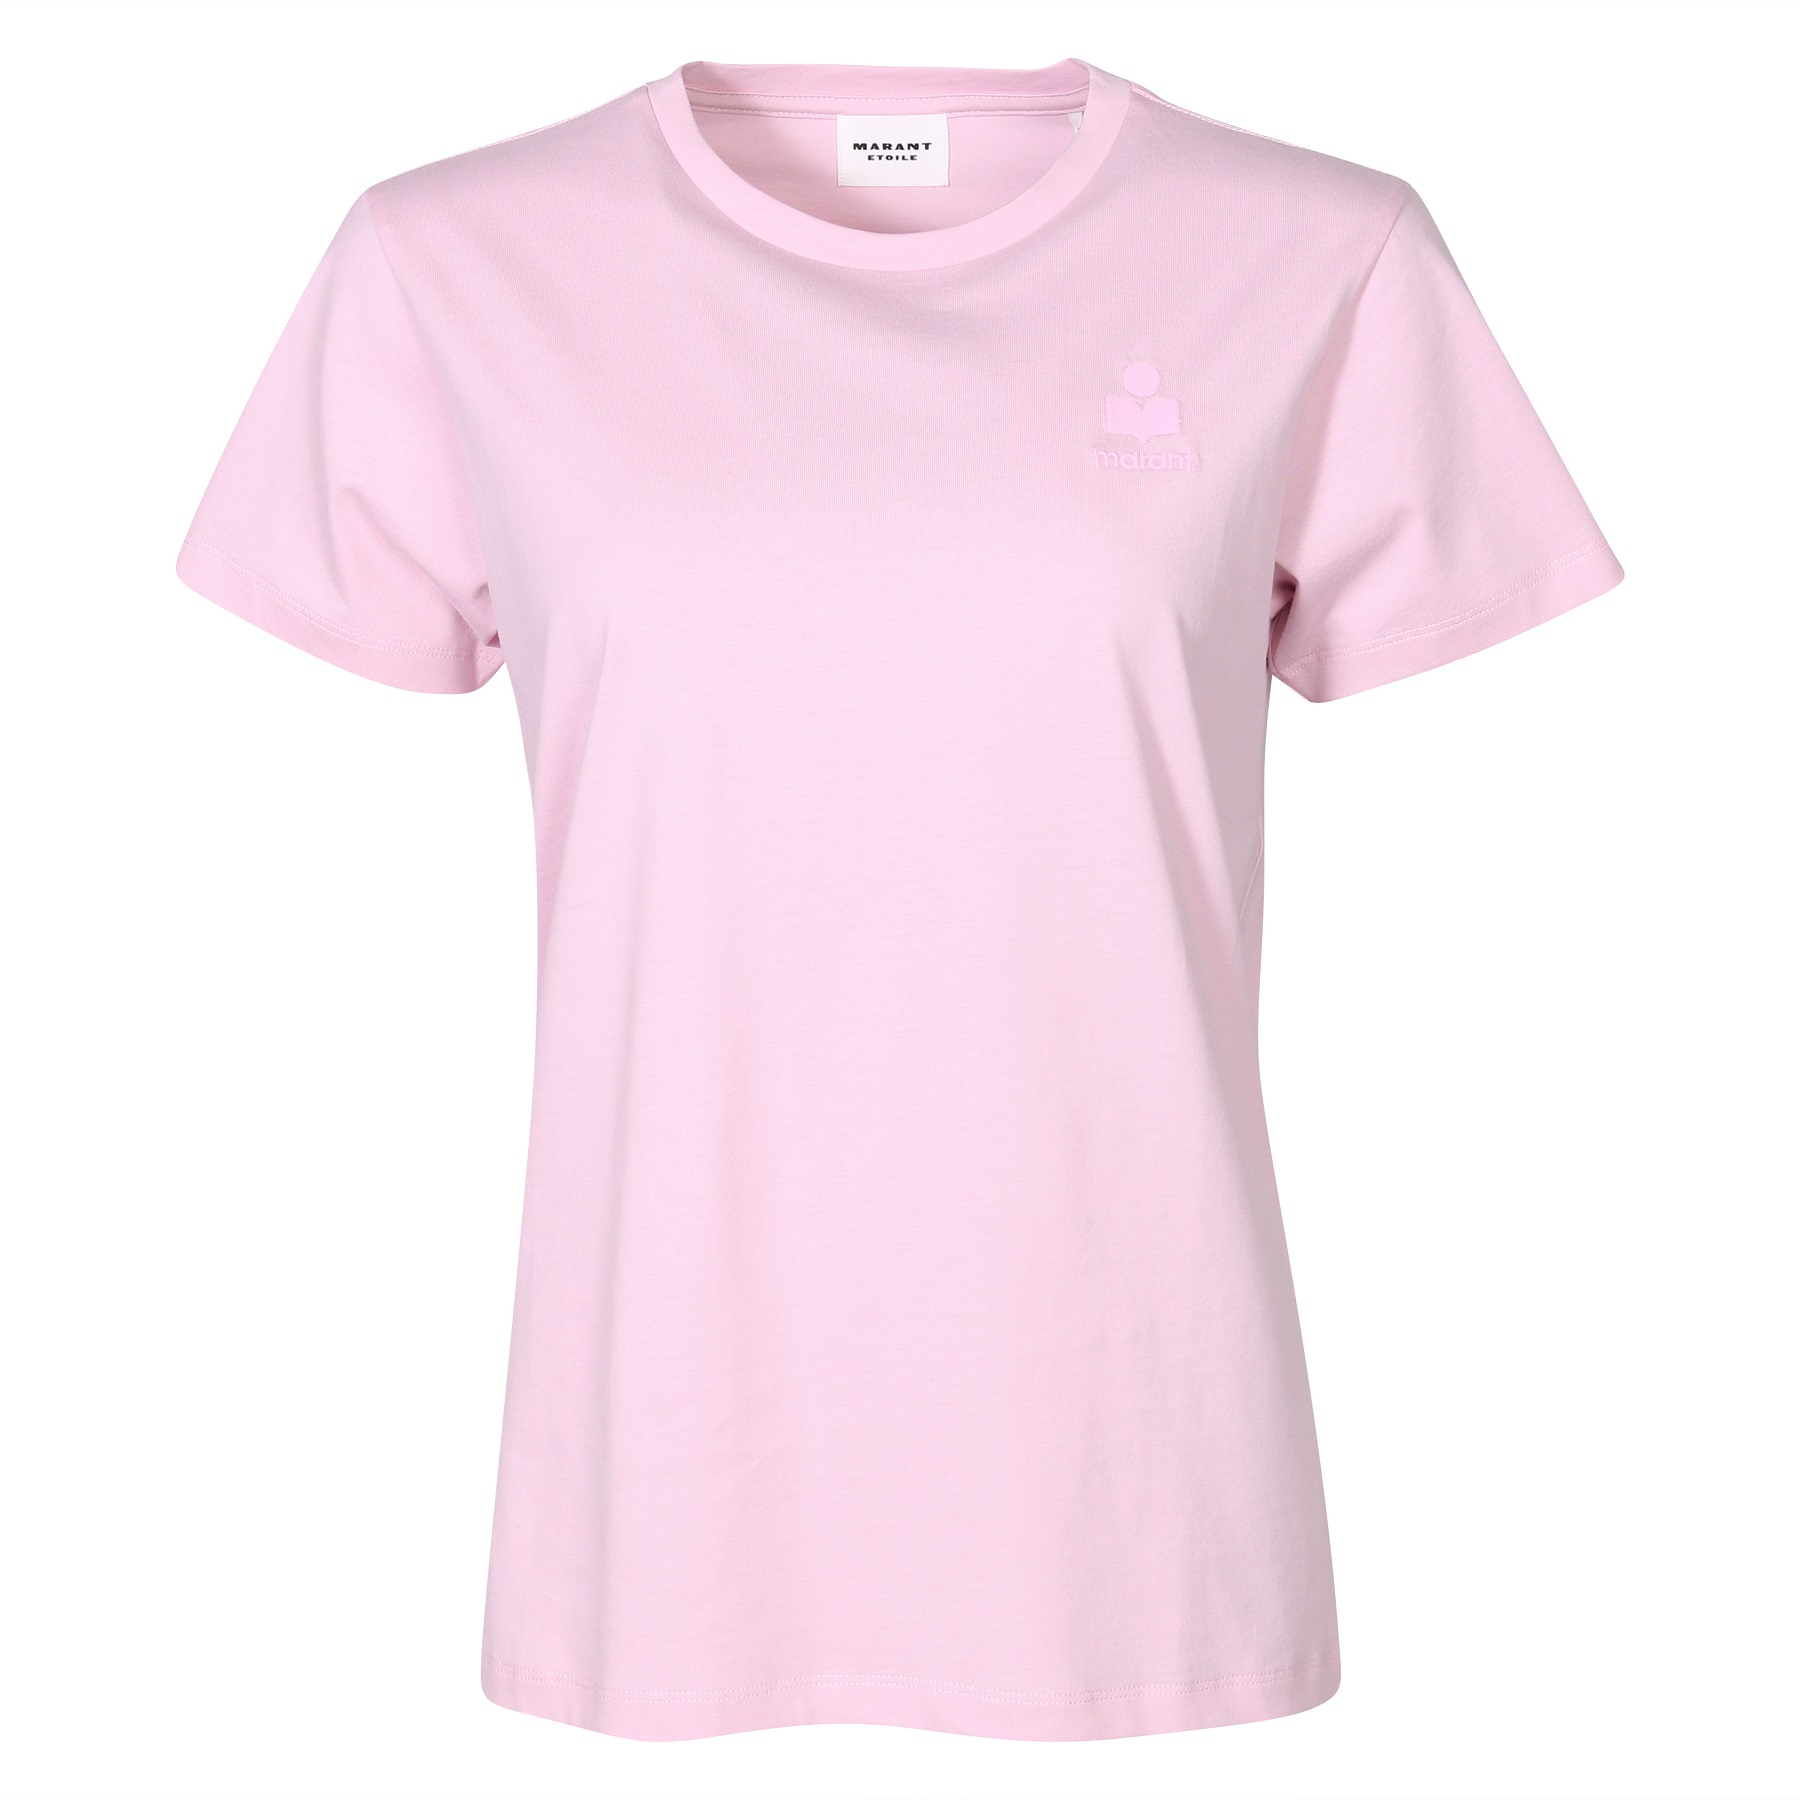 ISABEL MARANT ÉTOILE Aby Logo T-Shirt in Light Pink